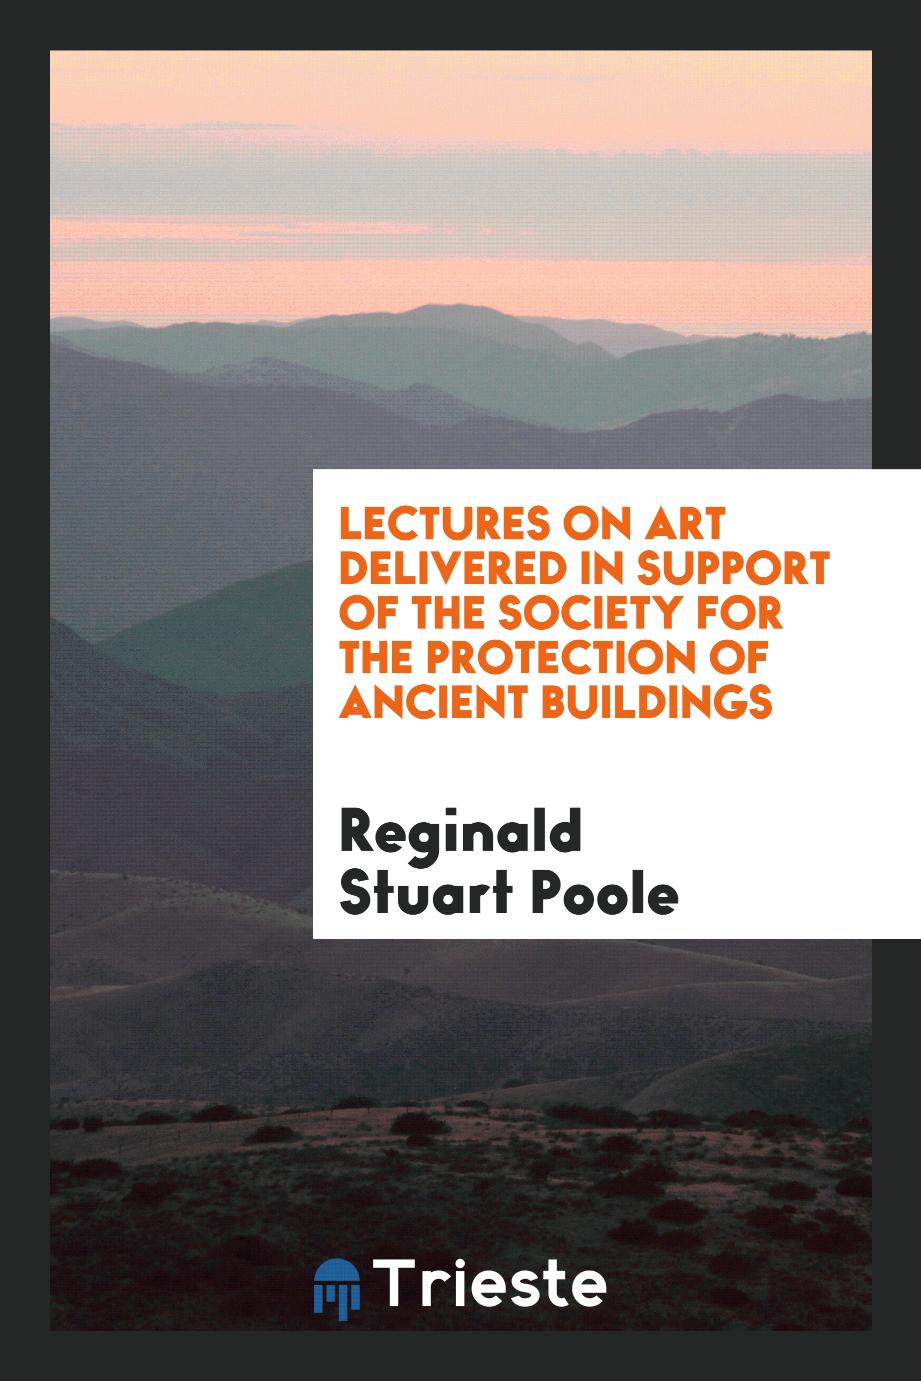 Lectures on art delivered in support of the Society for the Protection of Ancient Buildings